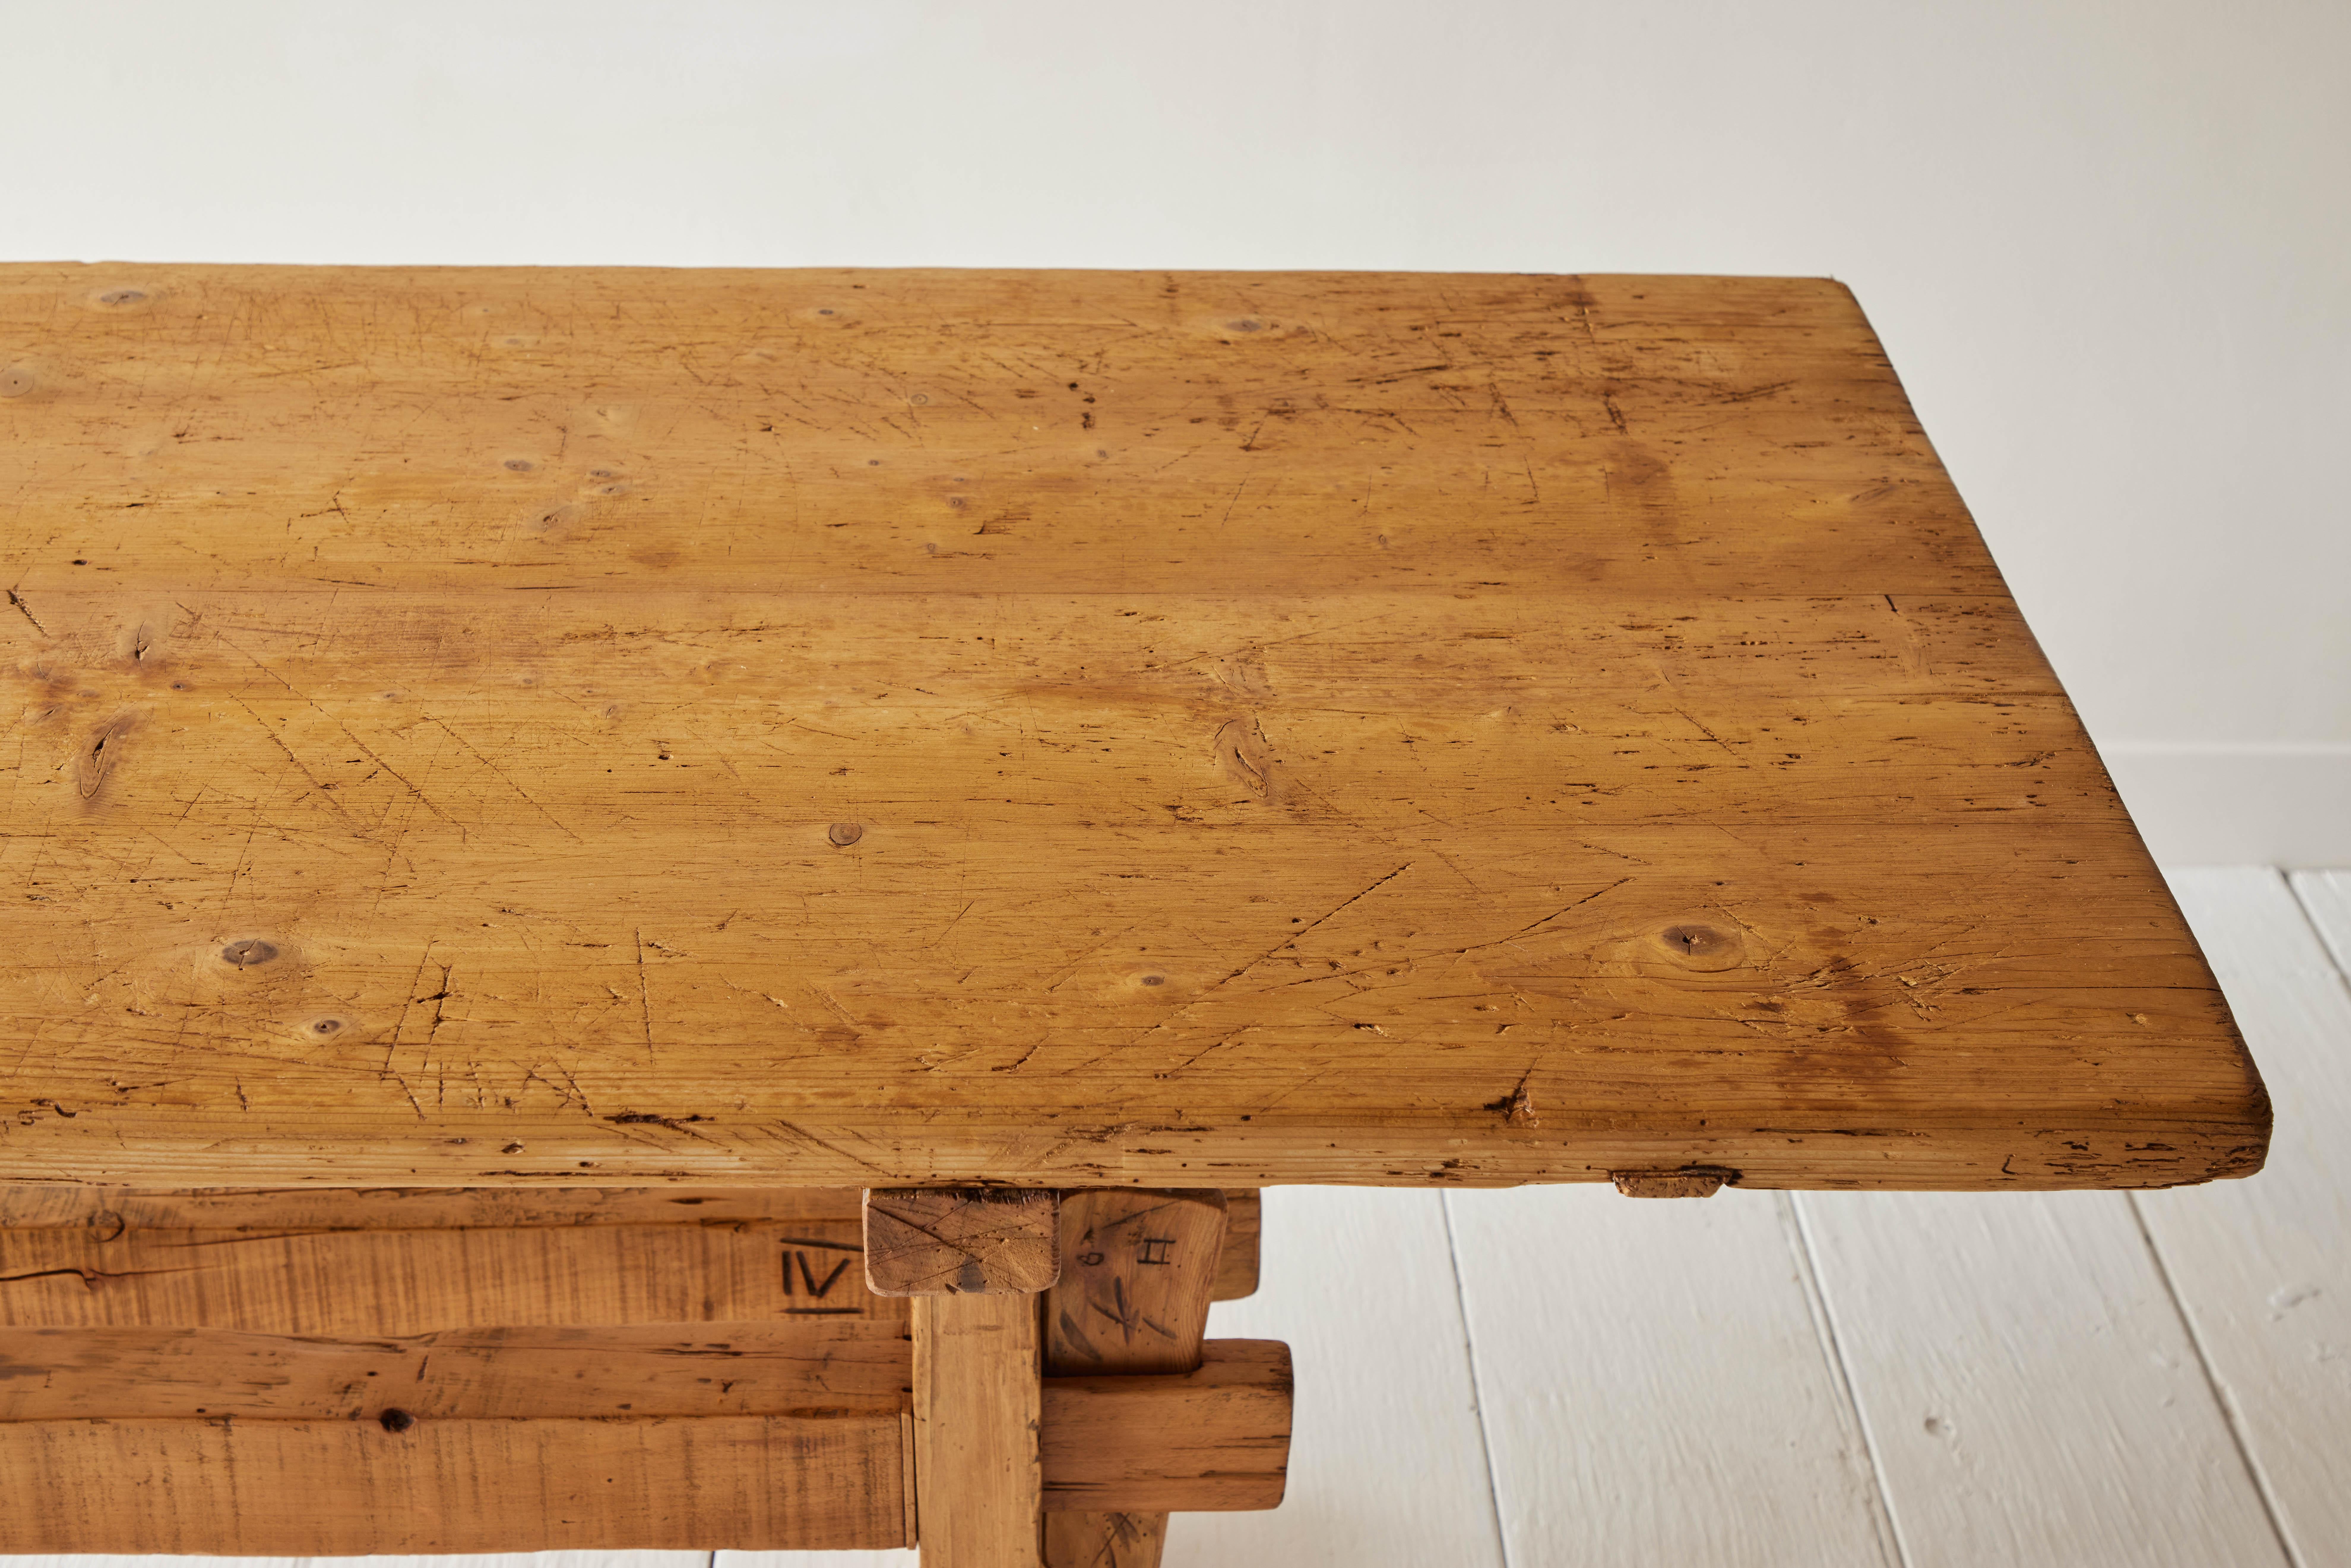 pine trestle dining table